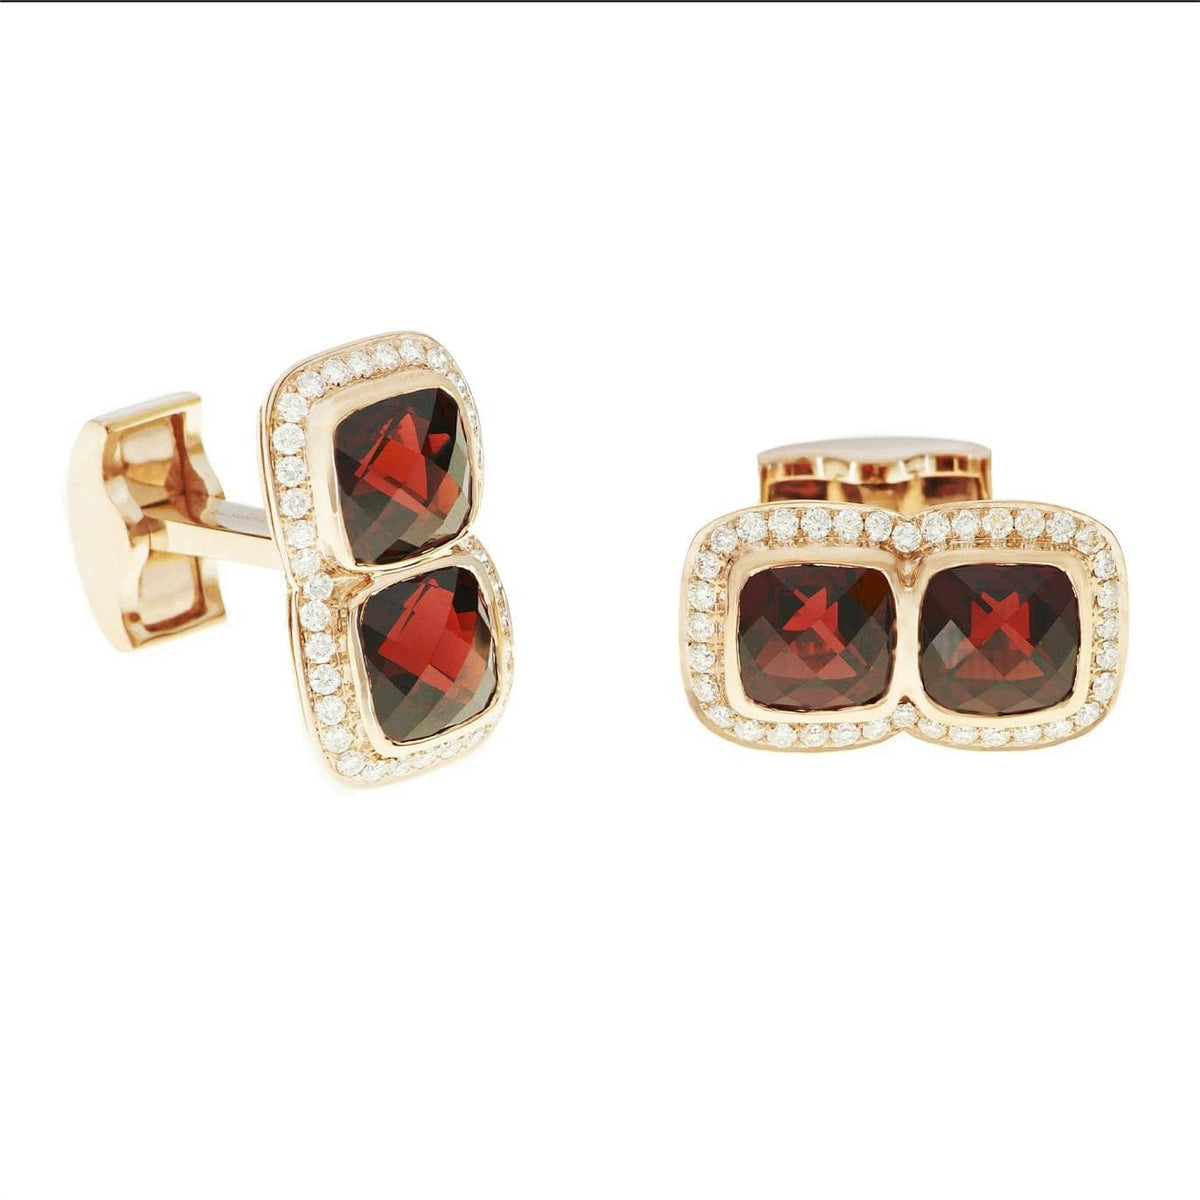 CHRIS AIRE GOLD CUFFLINKS - Chris Aire Fine Jewelry & Timepieces